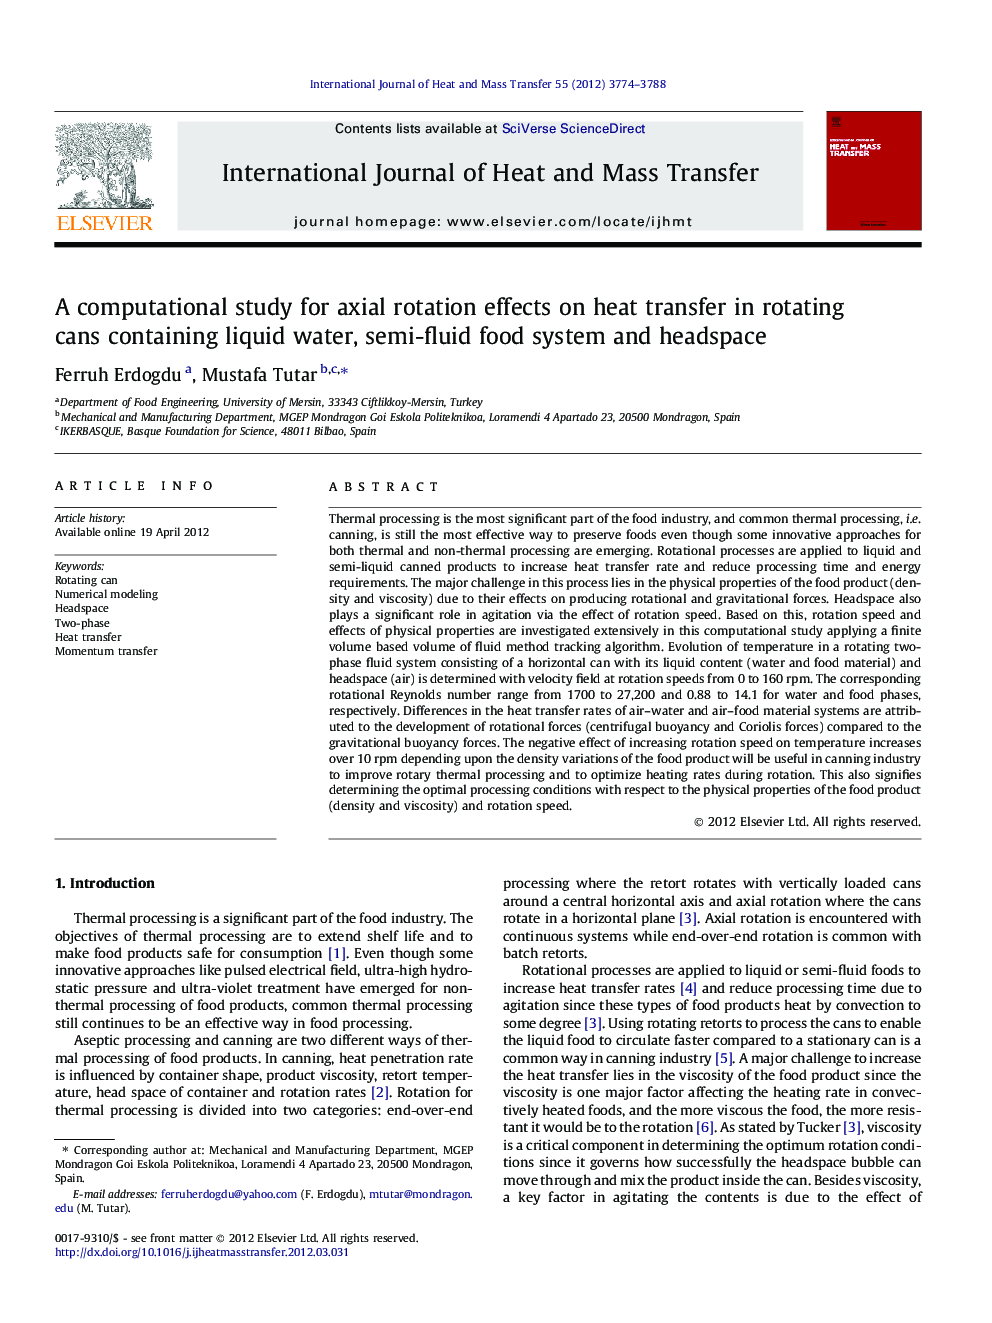 A computational study for axial rotation effects on heat transfer in rotating cans containing liquid water, semi-fluid food system and headspace